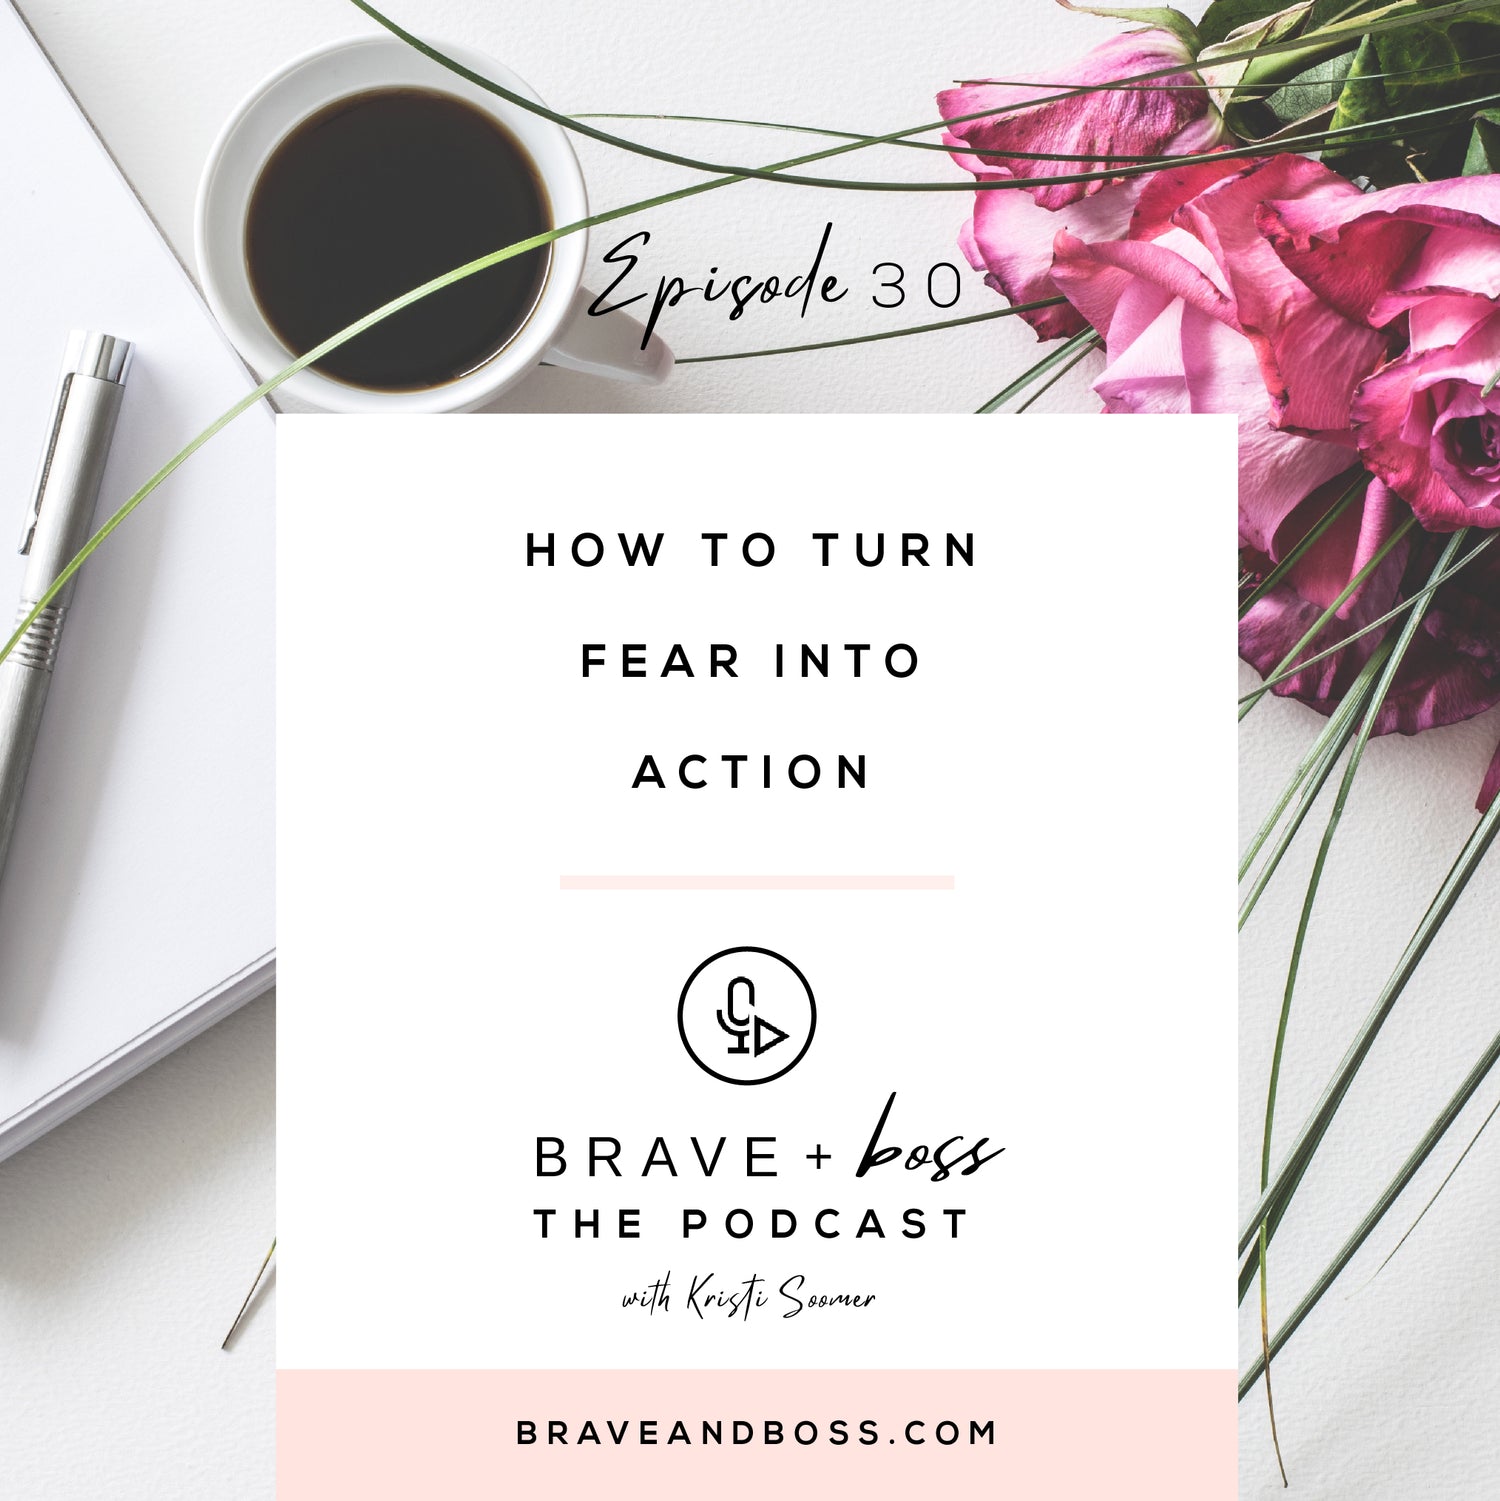 How to Turn Fear into Action